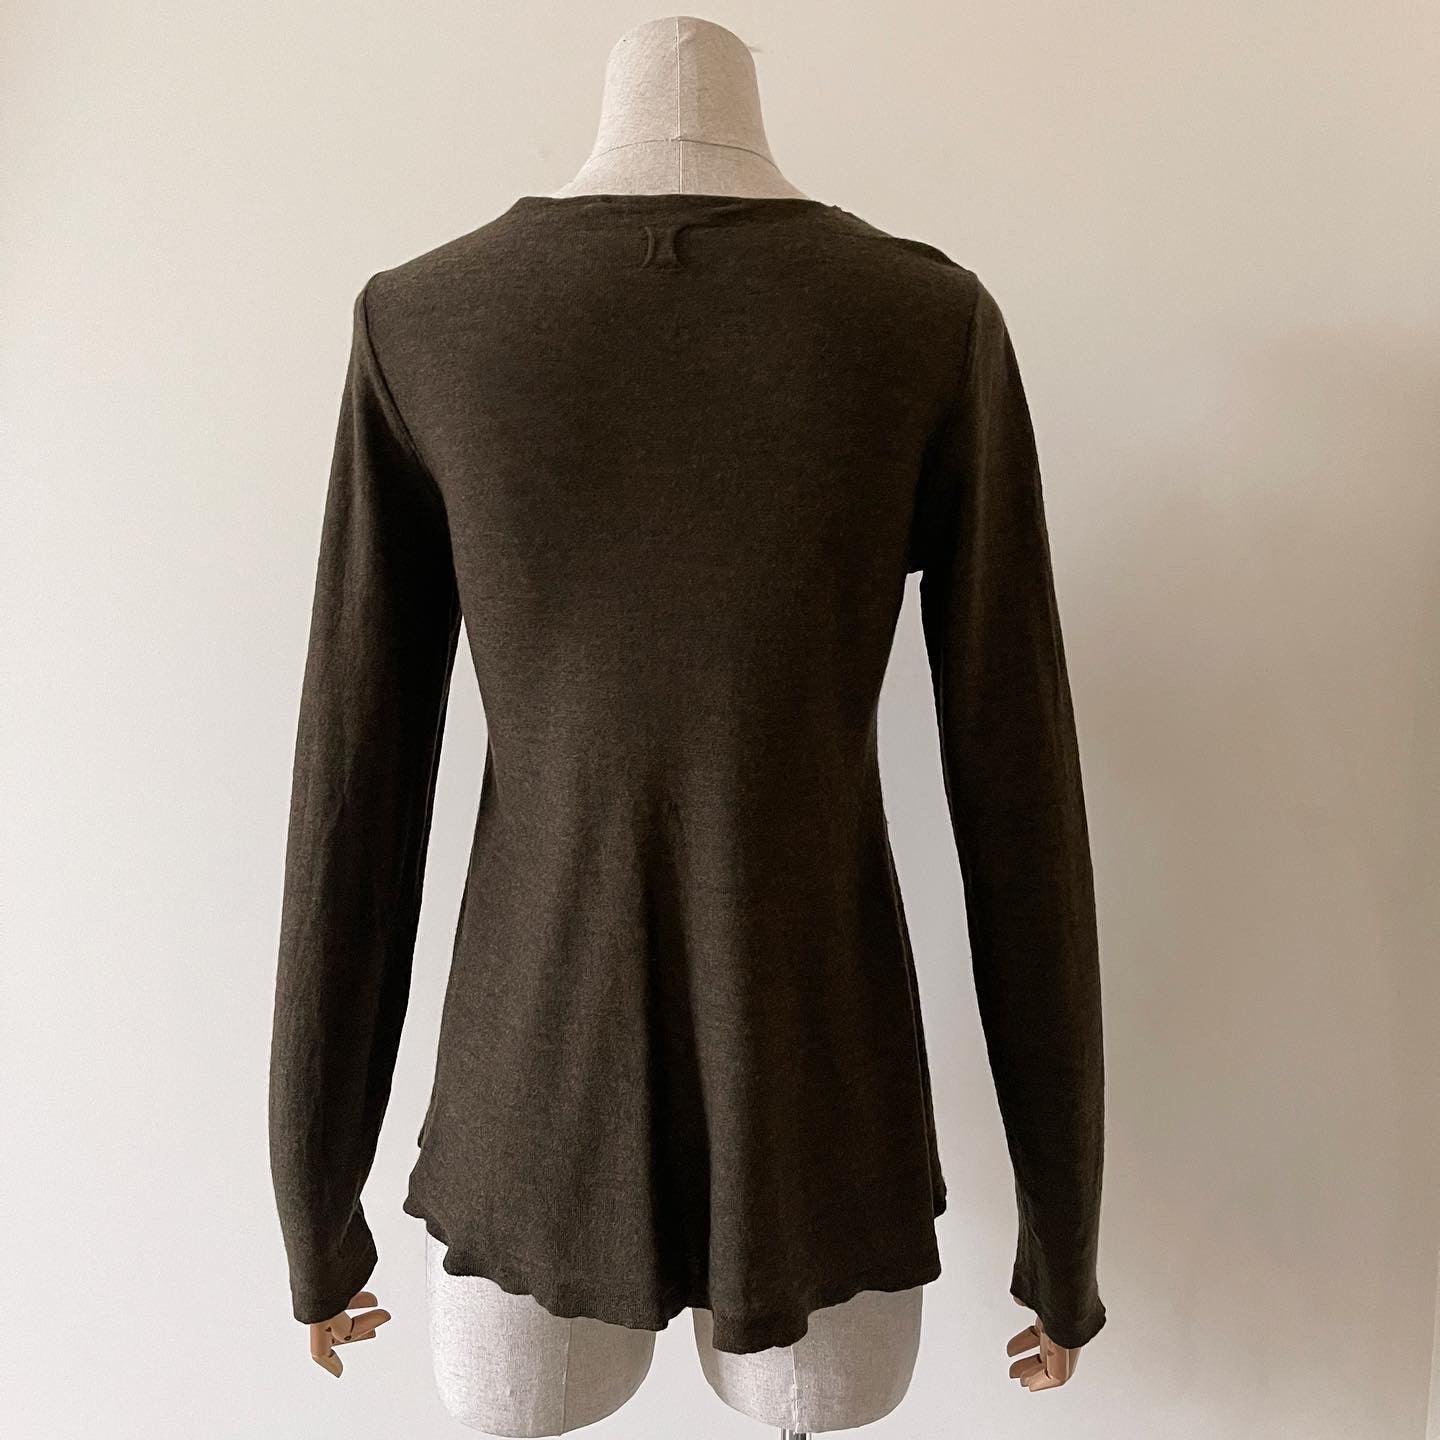 HANNES ROETHER - HANNES ROETHER Pullover - AVVIIVVA.COM